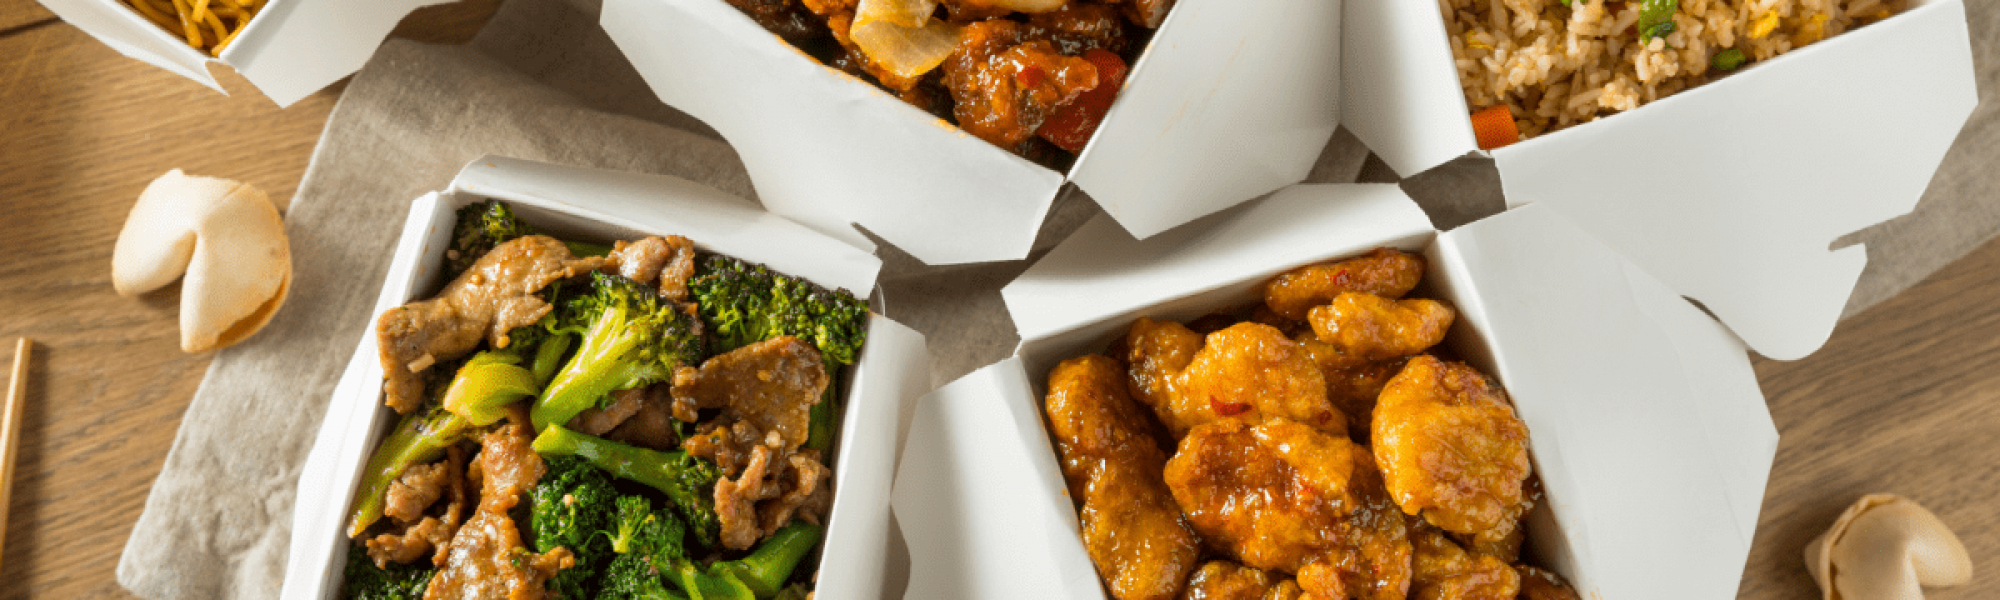 chinese food take out large meal